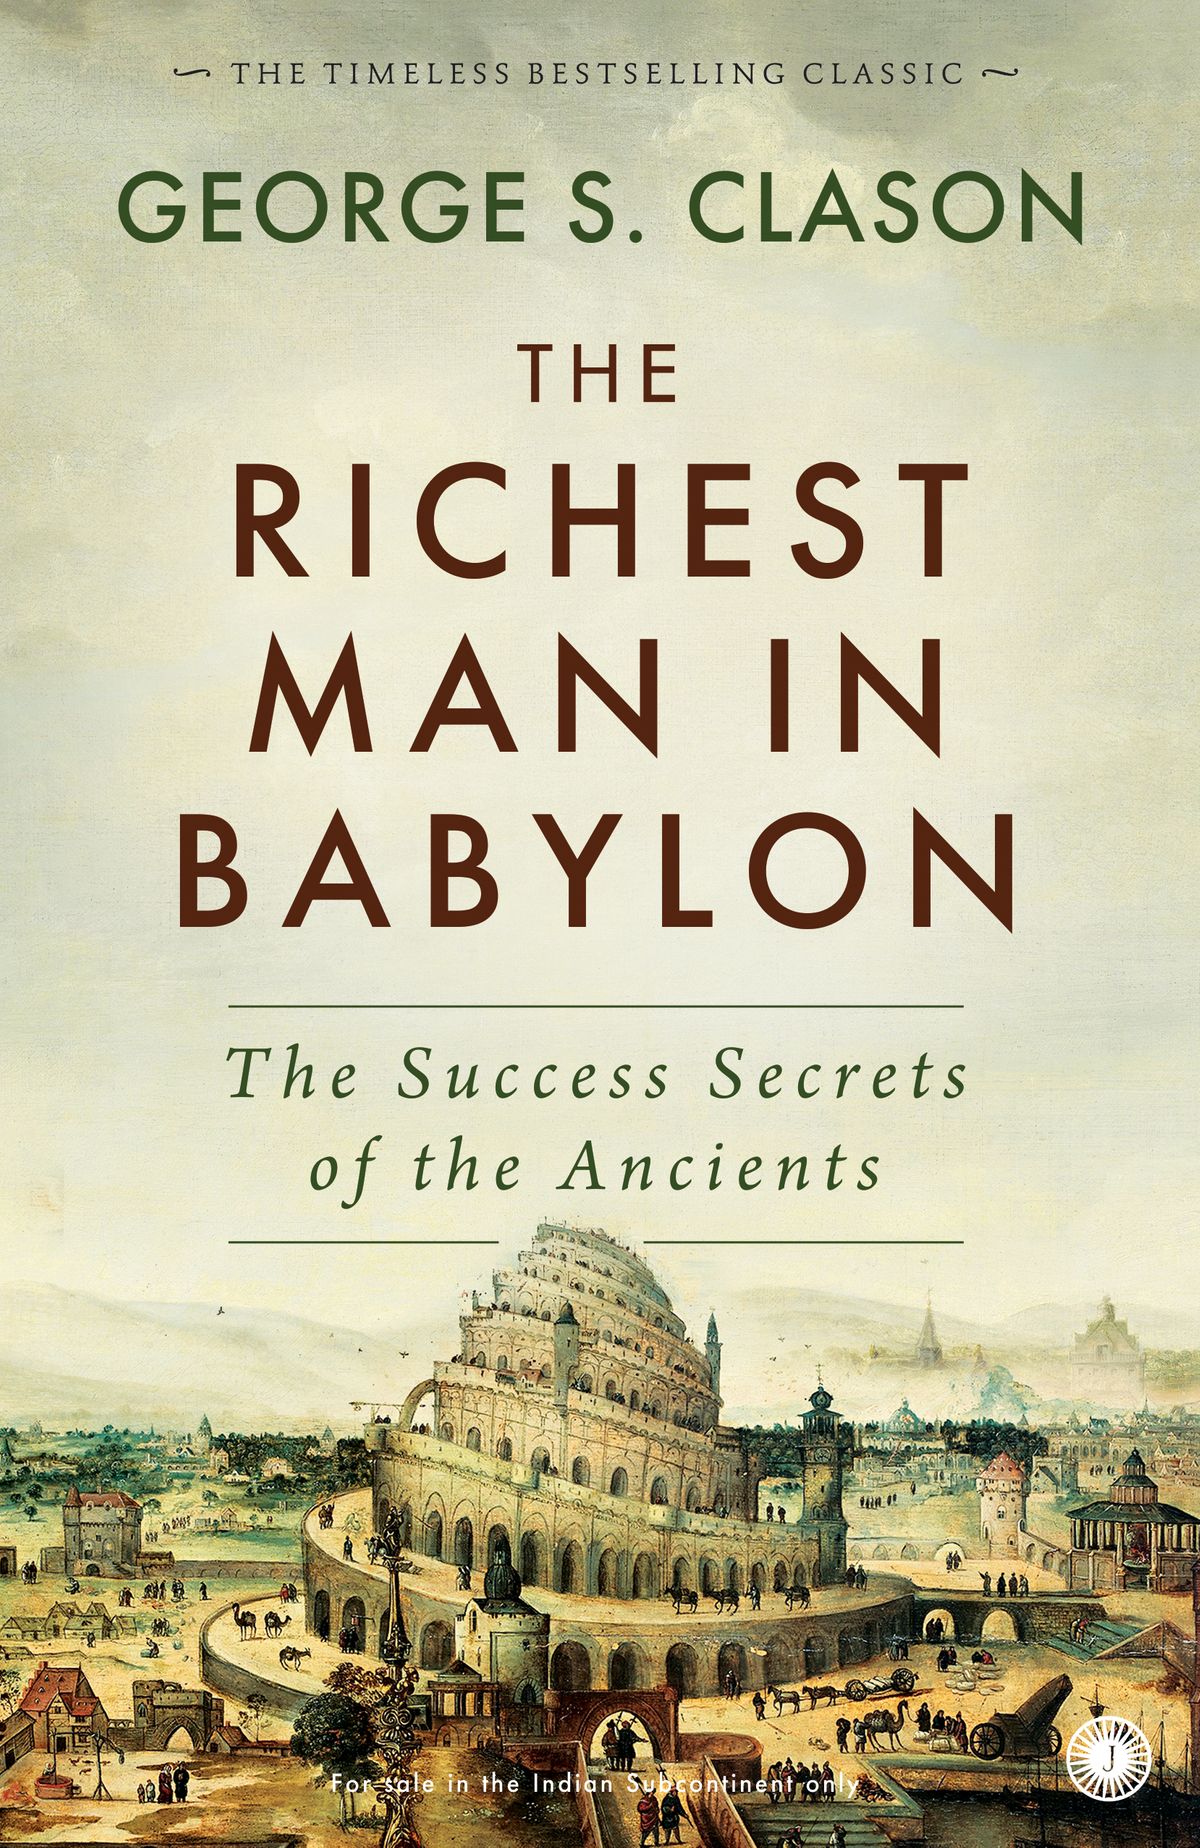 THE RICHEST MAN IN BABYLON (THE SUCCESS SECRETS OF THE ANCIENTS)